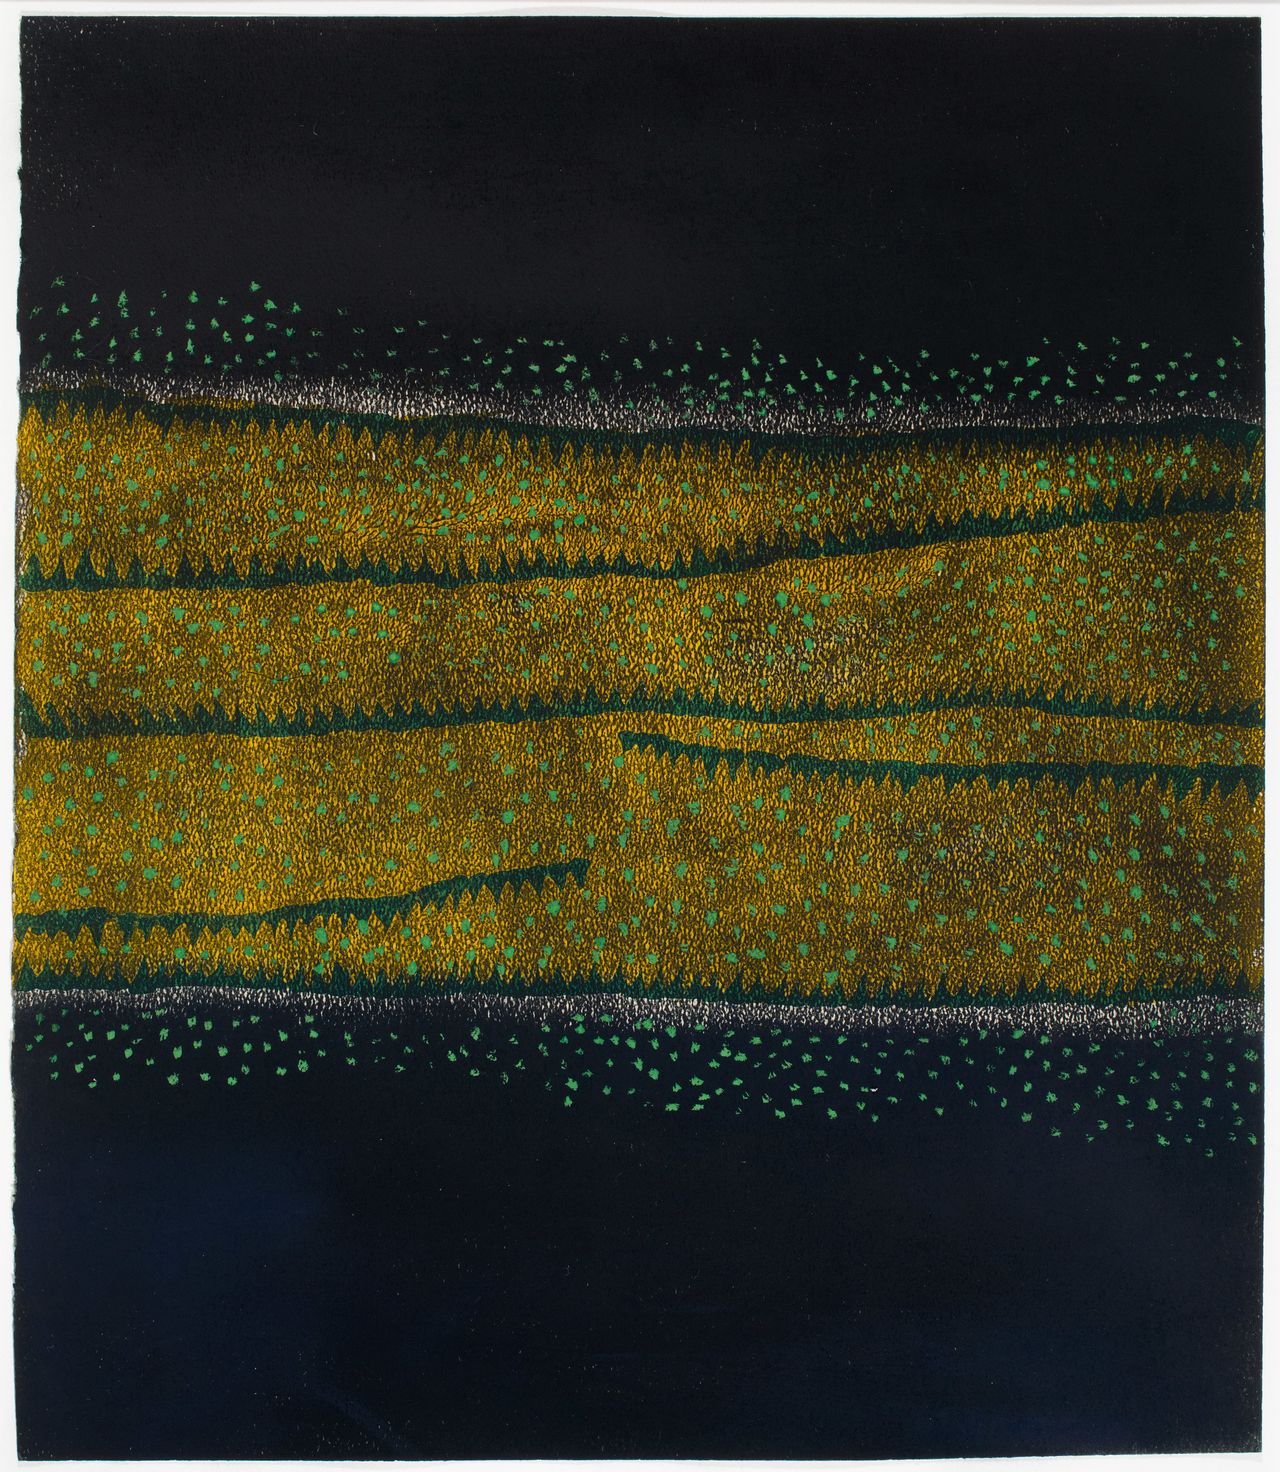 Yayoi Kusama, "The Hill," 1953. Gouache, pastel, oil paint, and wax on paper. 14 3/8 x 12 3/8 in.